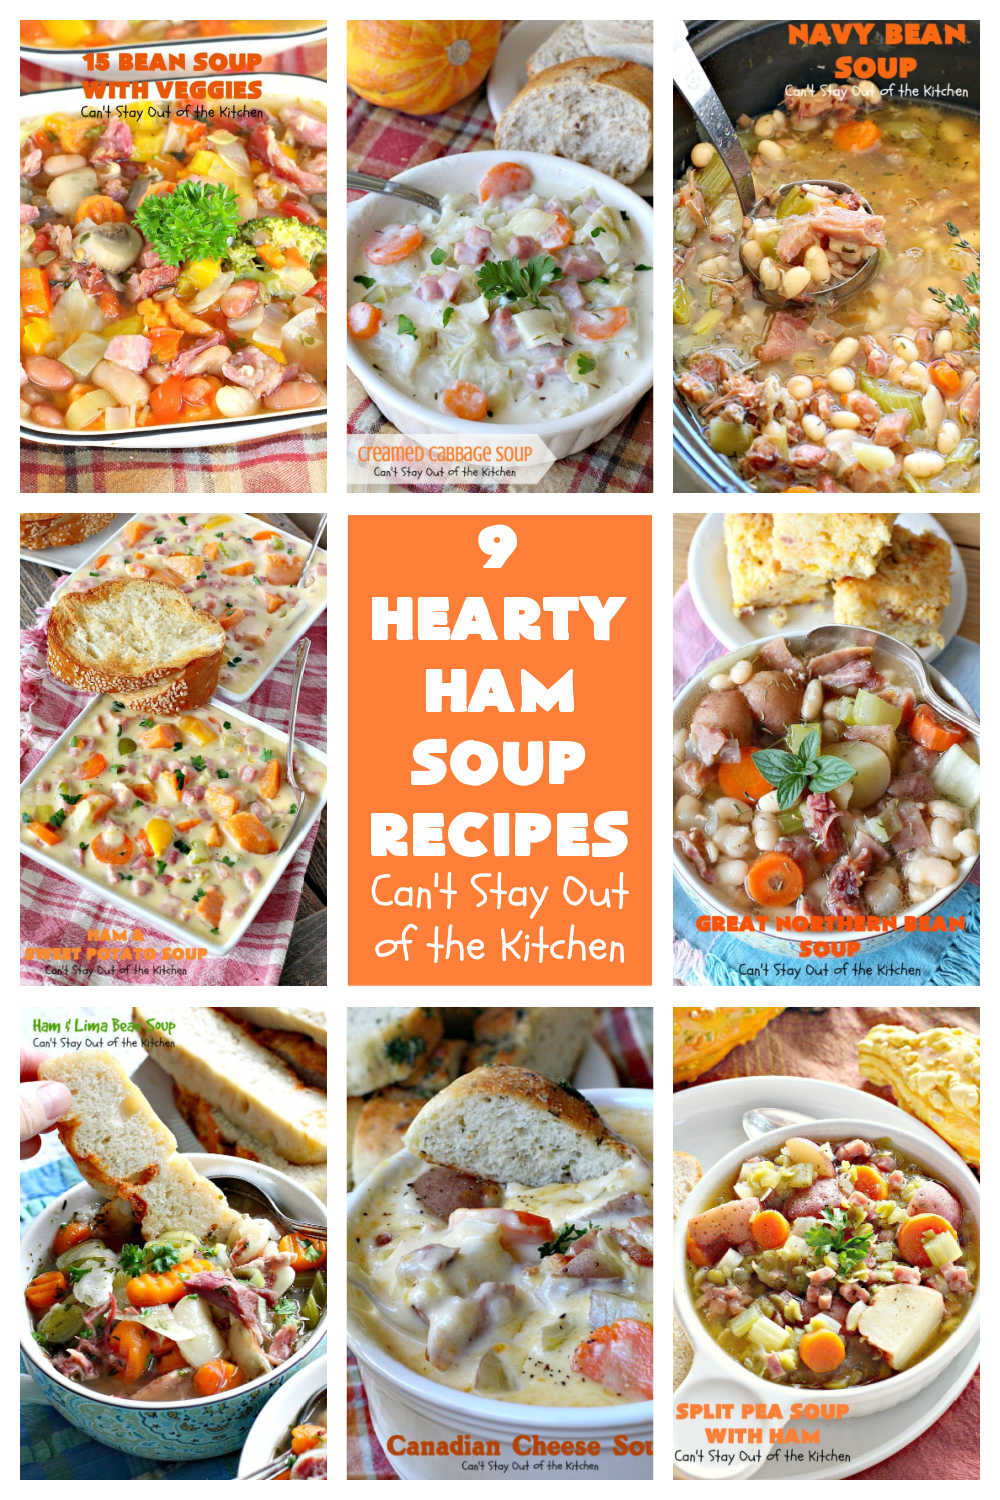 9 Hearty Ham Soup Recipes | Can't Stay Out of the Kitchen | 9 delicious ways to use up leftover #ham from #Easter or other special occasions. These #soup #recipes are hearty, filling & satisfying. Perfect comfort food for winter months. #chowder #HamSoup #HamSoupRecipes #9HeartyHamSoupRecipes